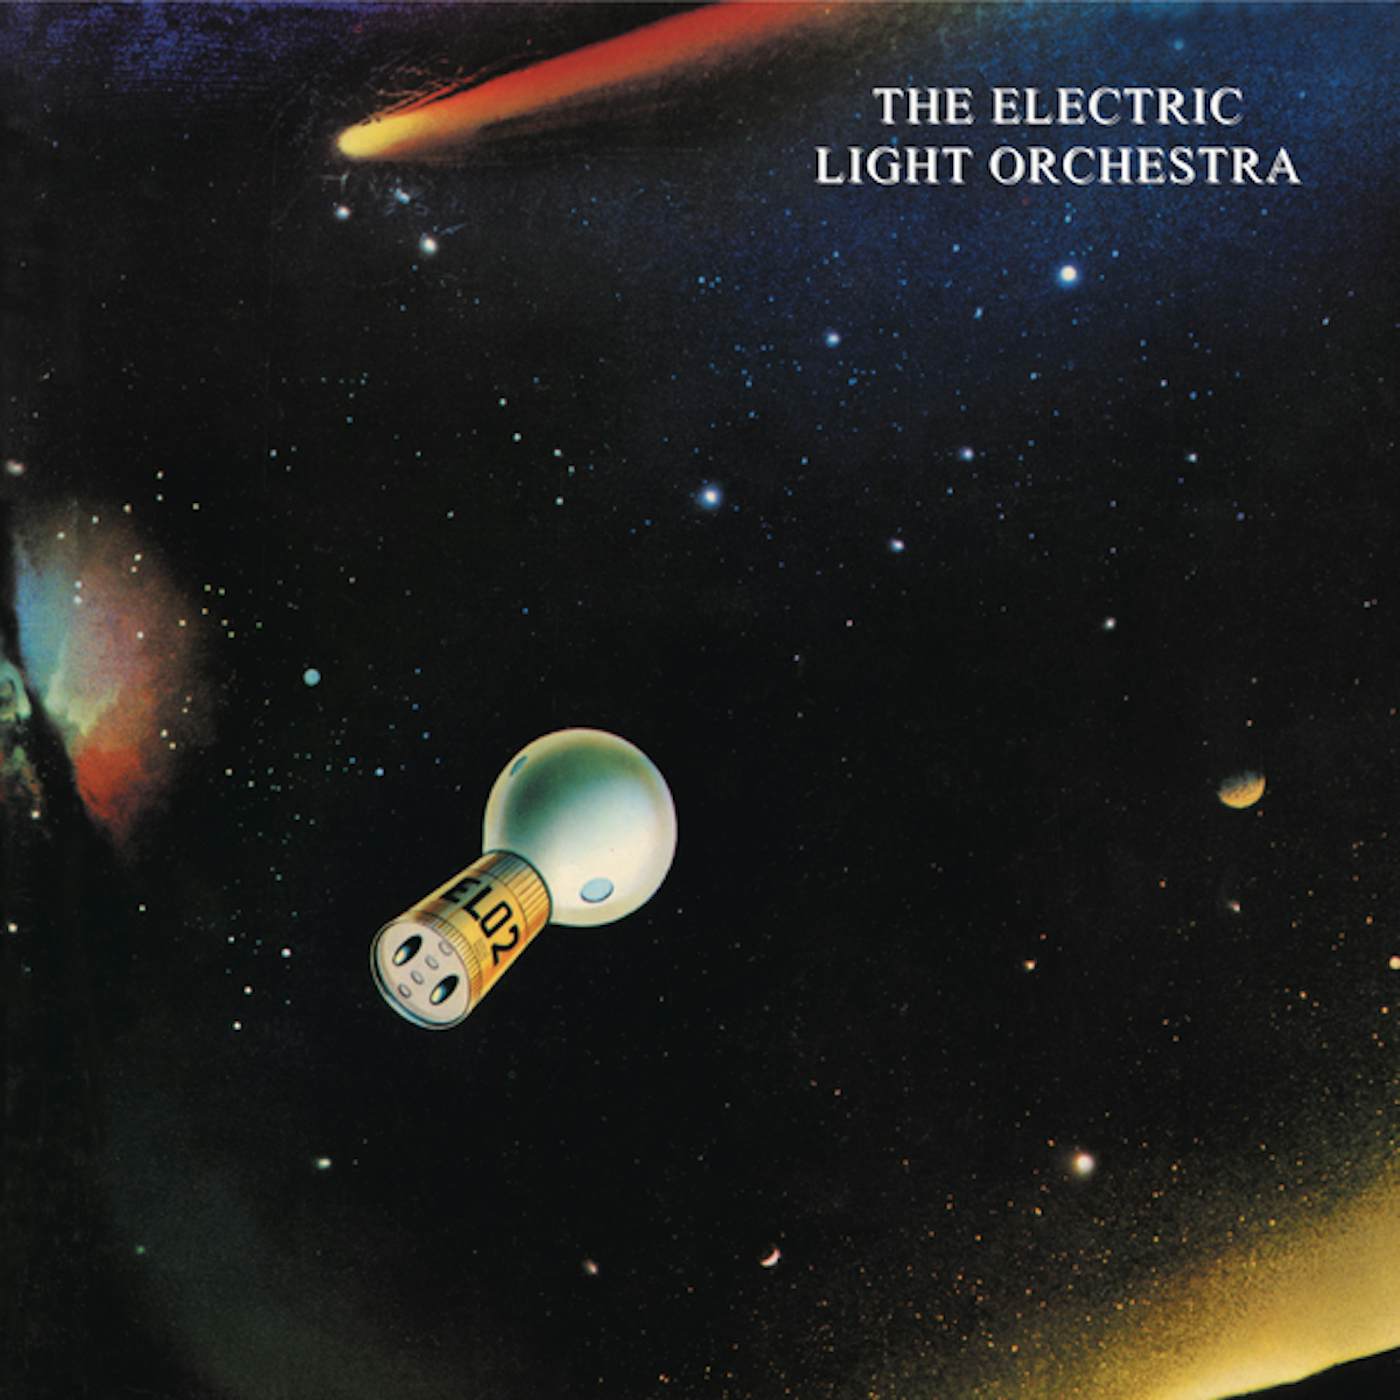 ELO (Electric Light Orchestra) 2 CD